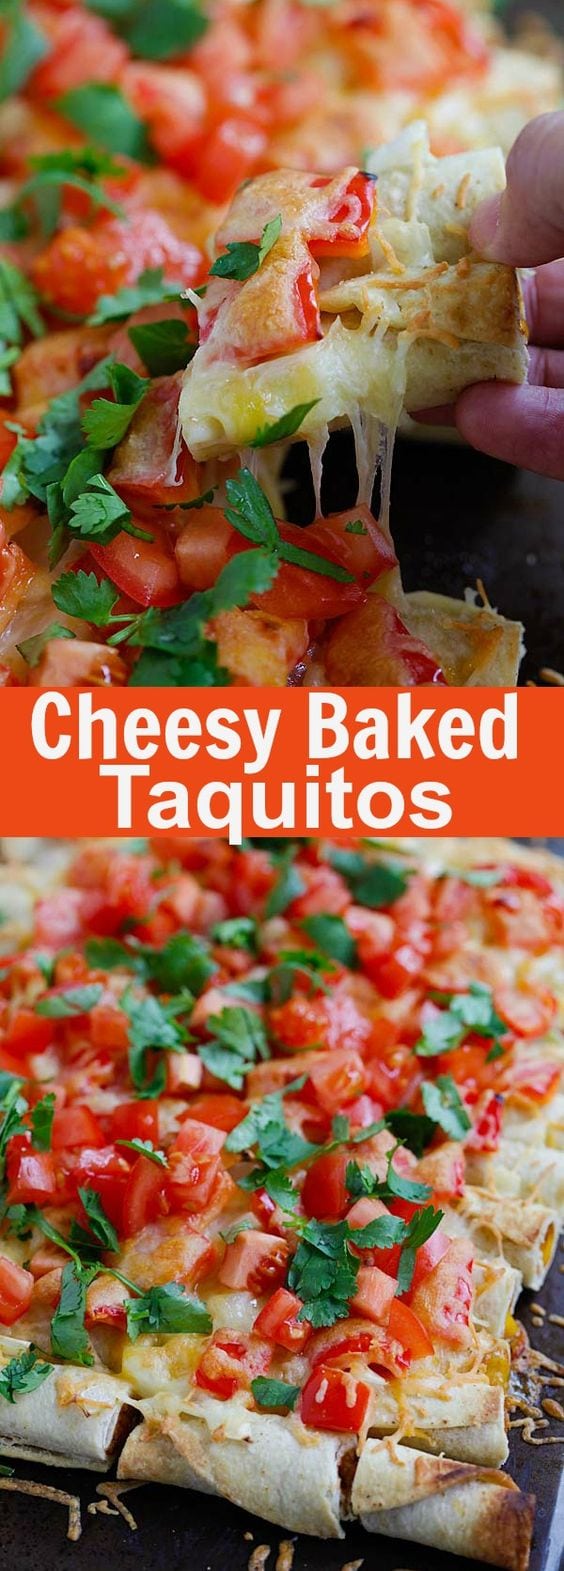 Cheesy Baked Taquitos – the easiest baked taquitos ever, loaded with cheese. Takes 15 mins active time to make this amazing recipe | rasamalaysia.com